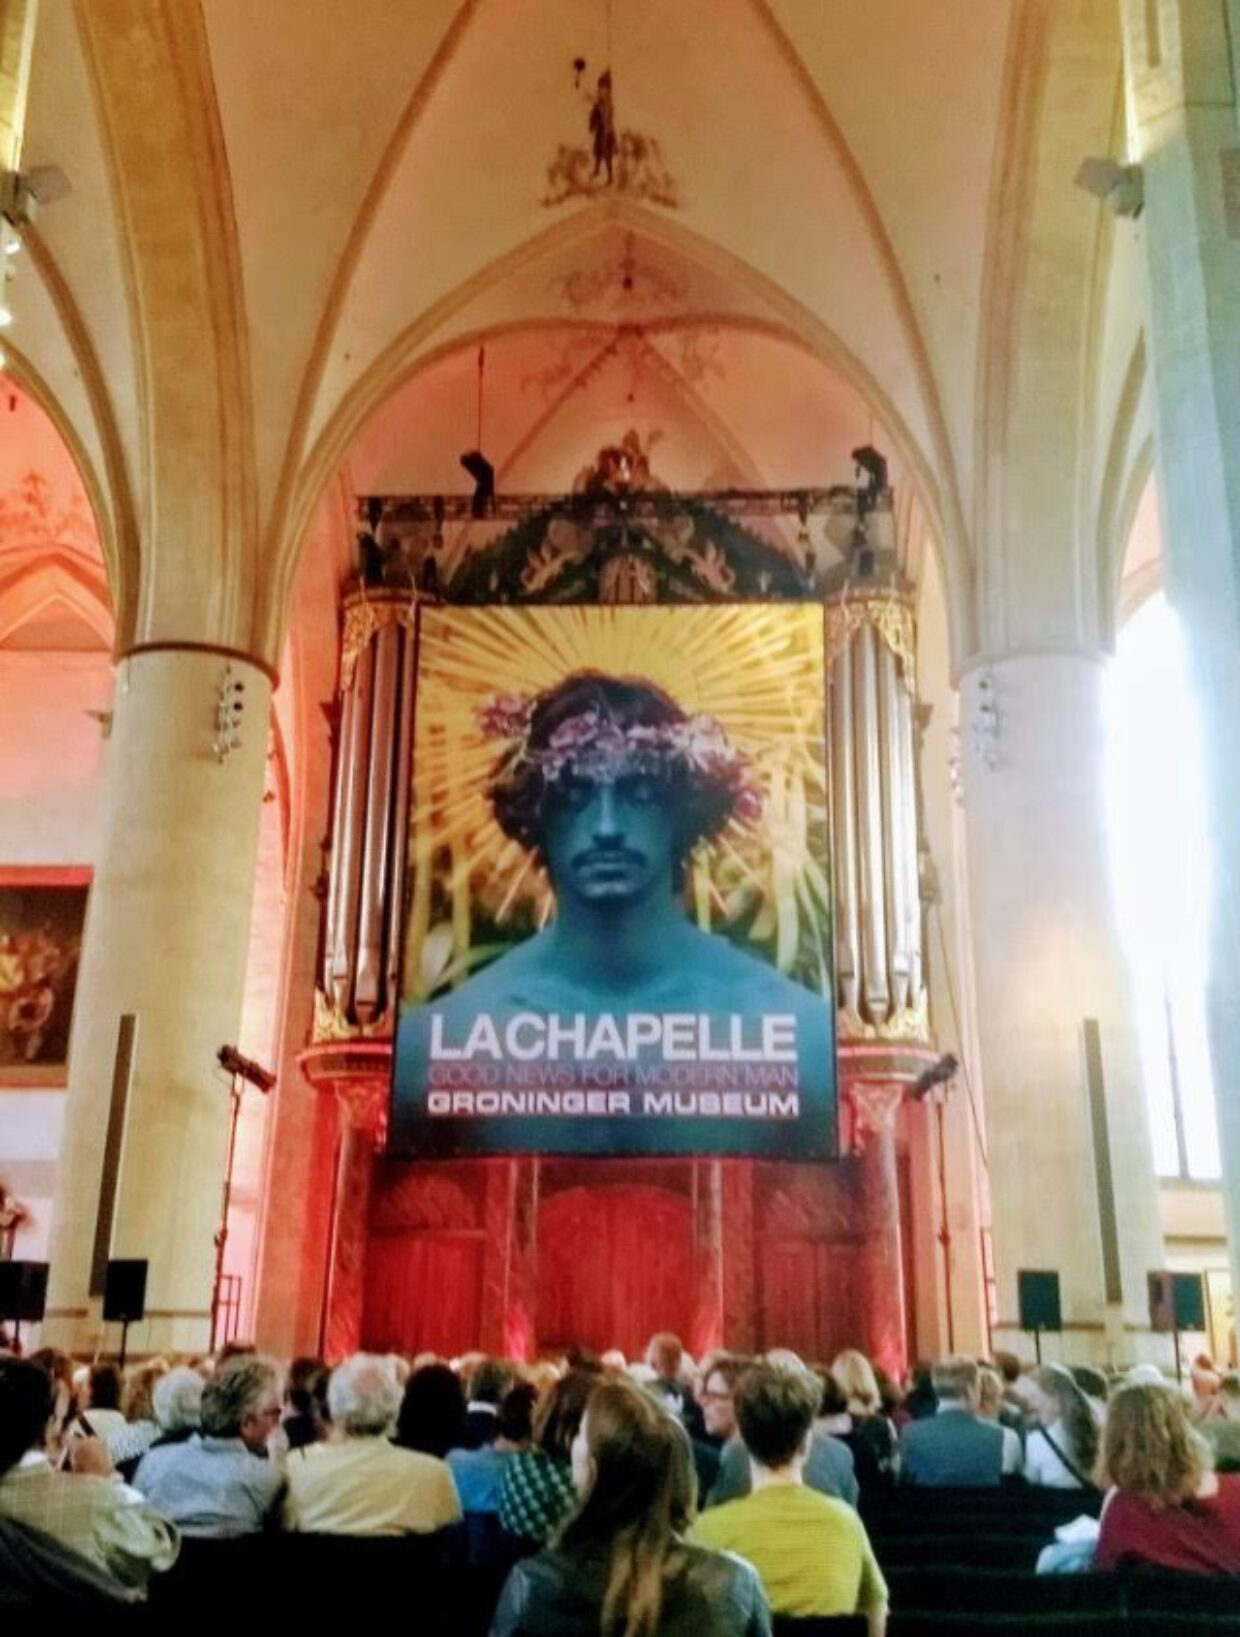 LaChapelle, Good News for Modern Man, at the Groninger Museum | 2